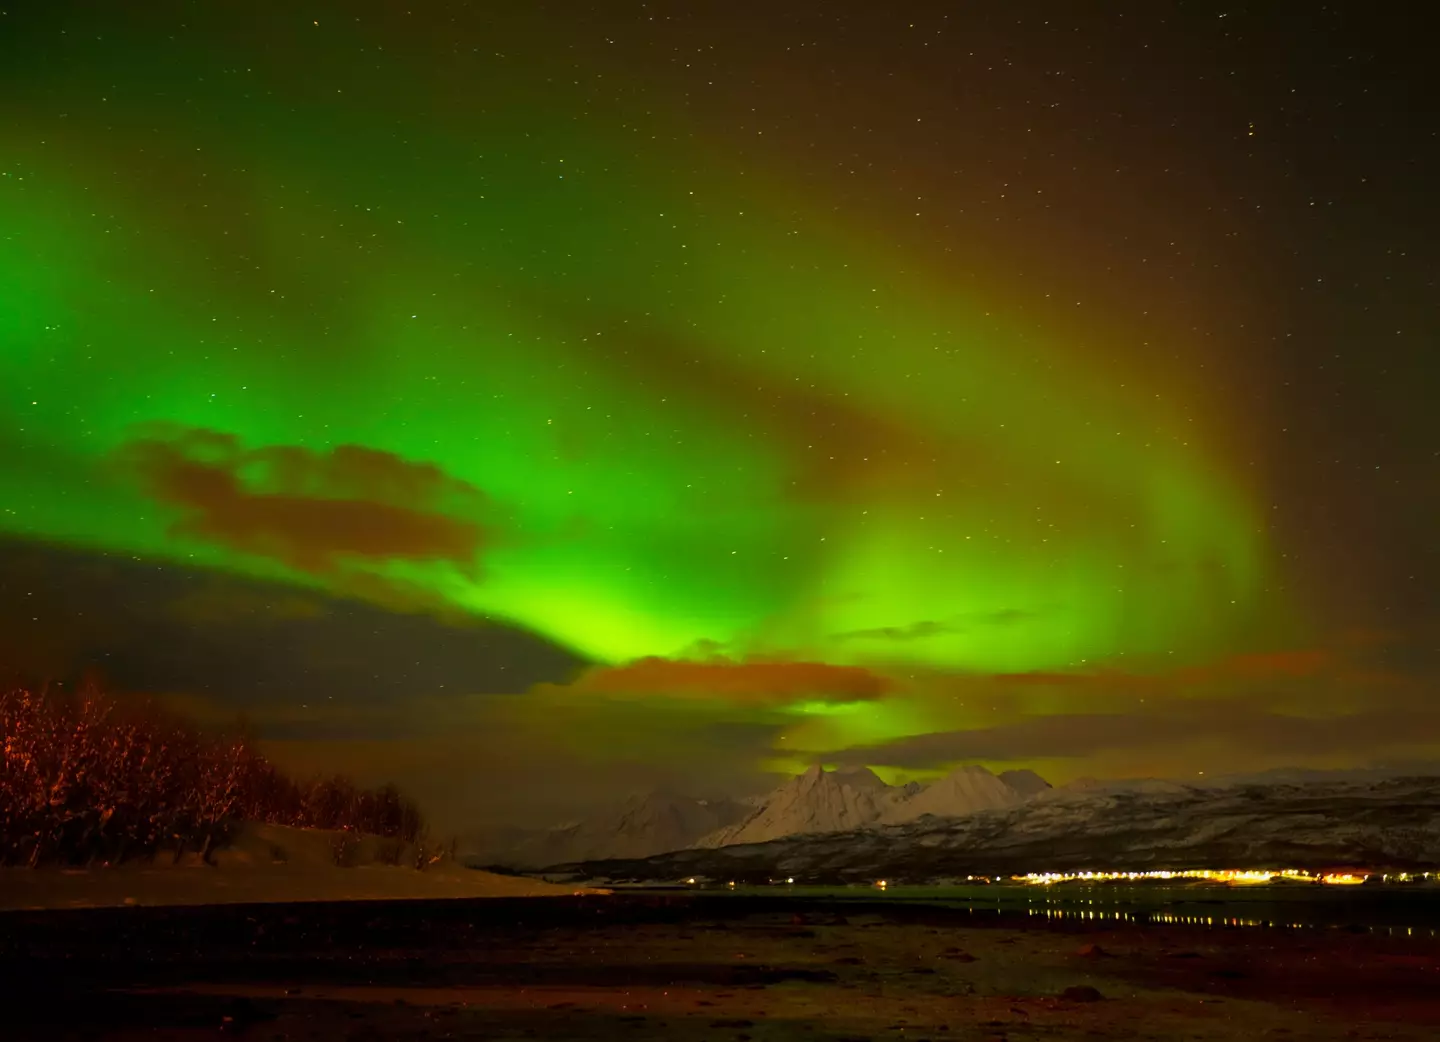 A CME that’s heading towards Earth means the aurora could be visible this week.